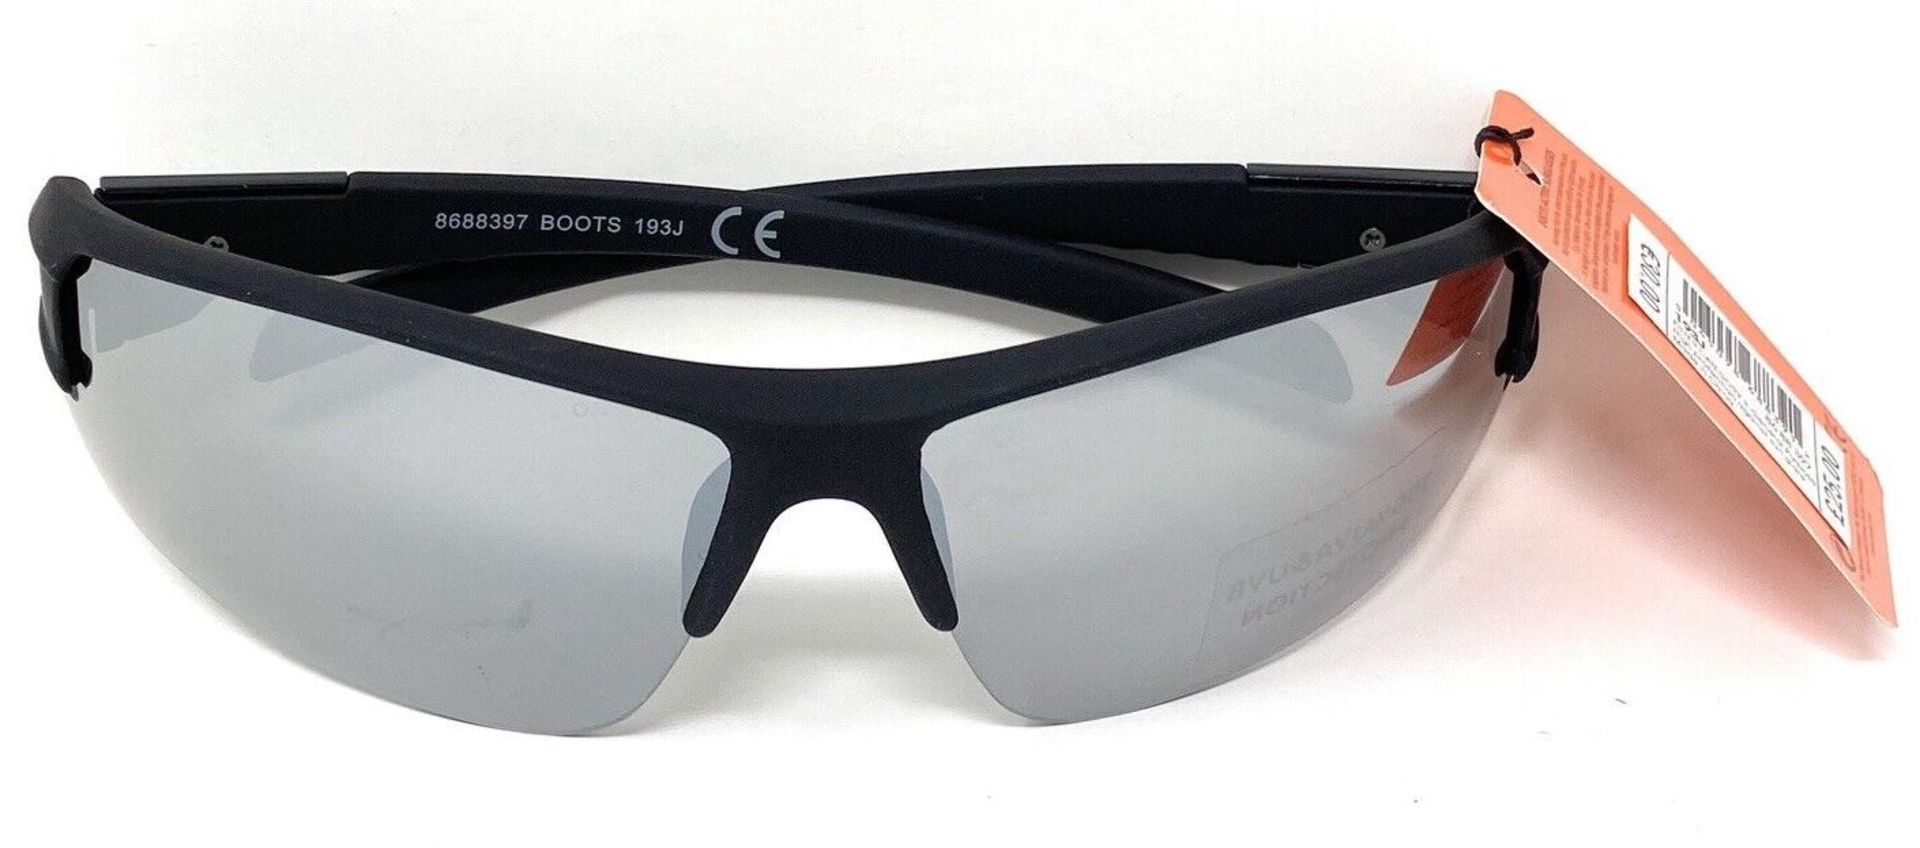 40 x Boots Active Sports Styled Sunglasses 100% UVA - (NEW) - BOOTS RRP £1,000 !